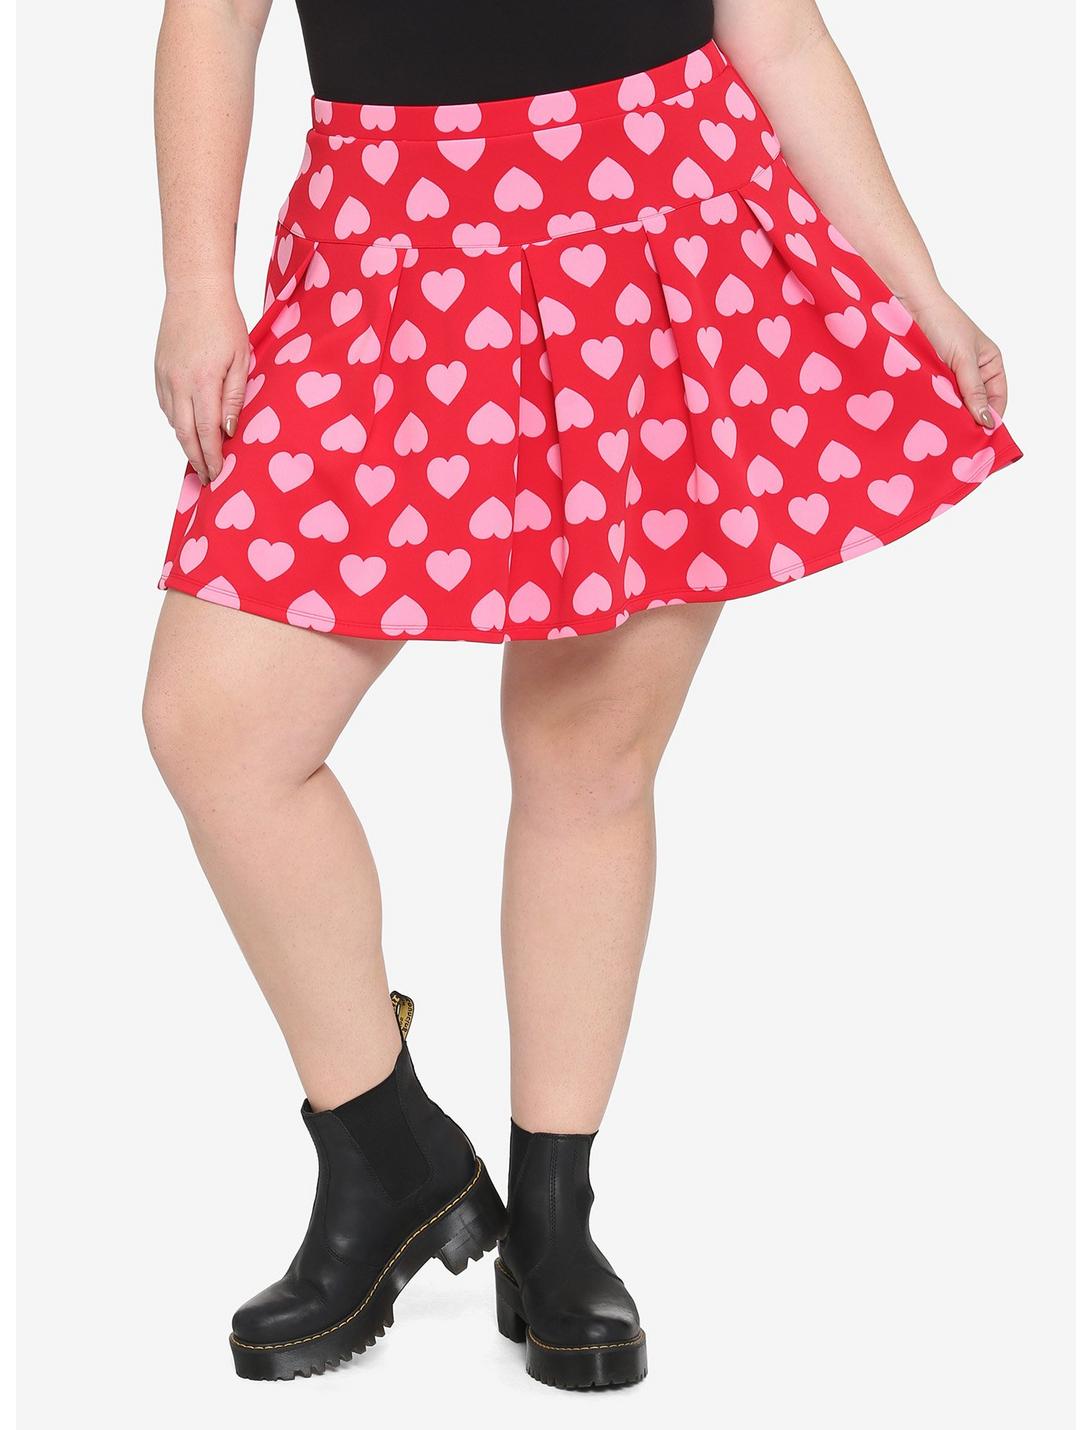 Red & Pink Heart Skater Skirt Plus Size | Hot Topic